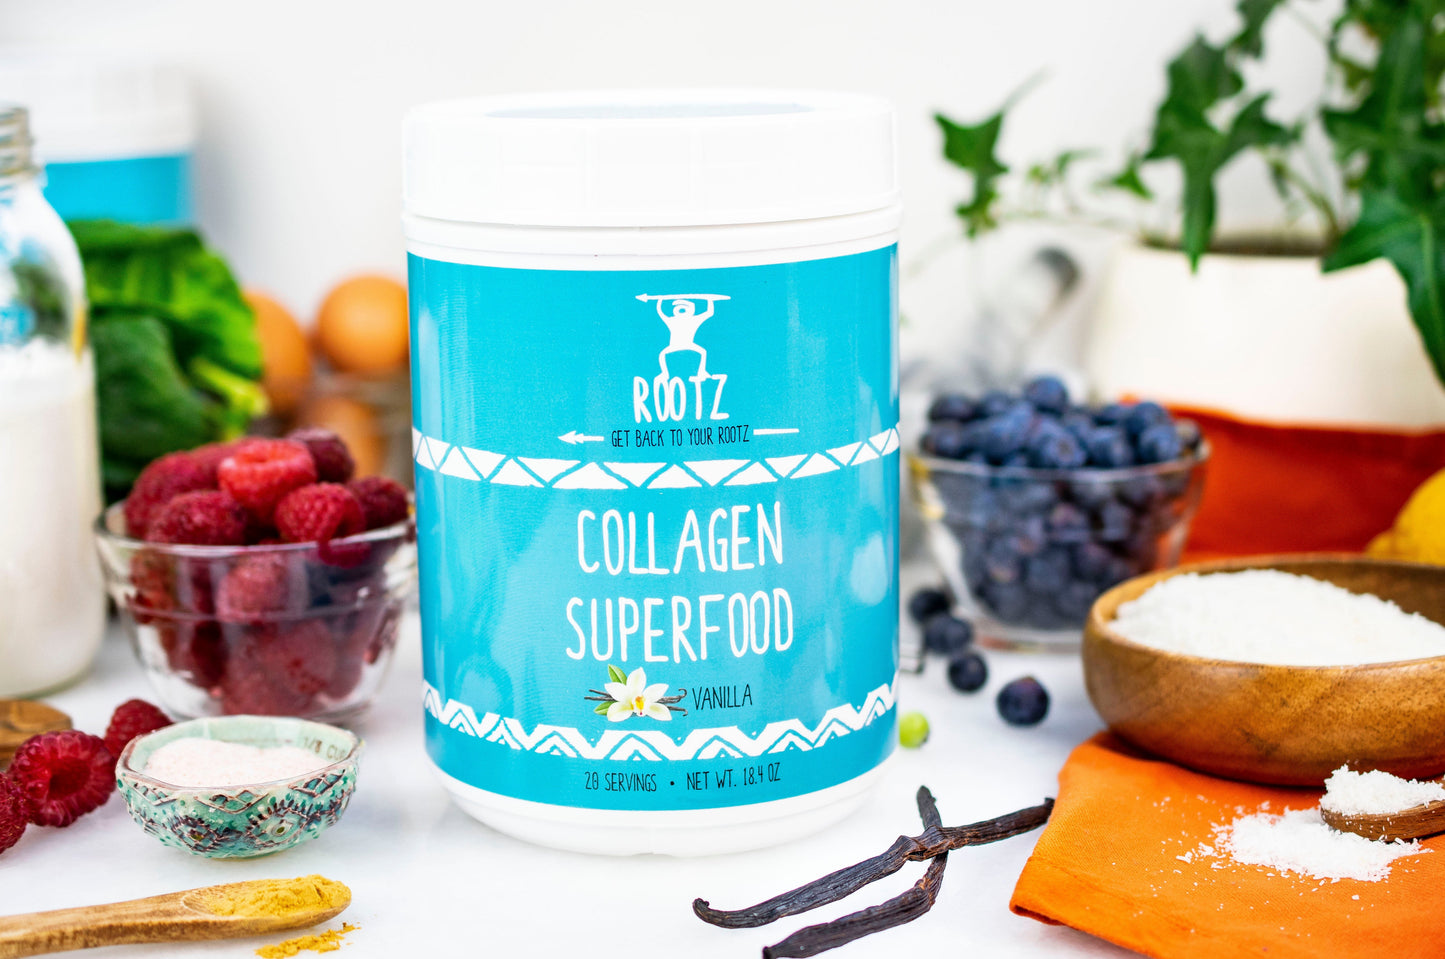 Collagen Superfood x1 - Special Offer